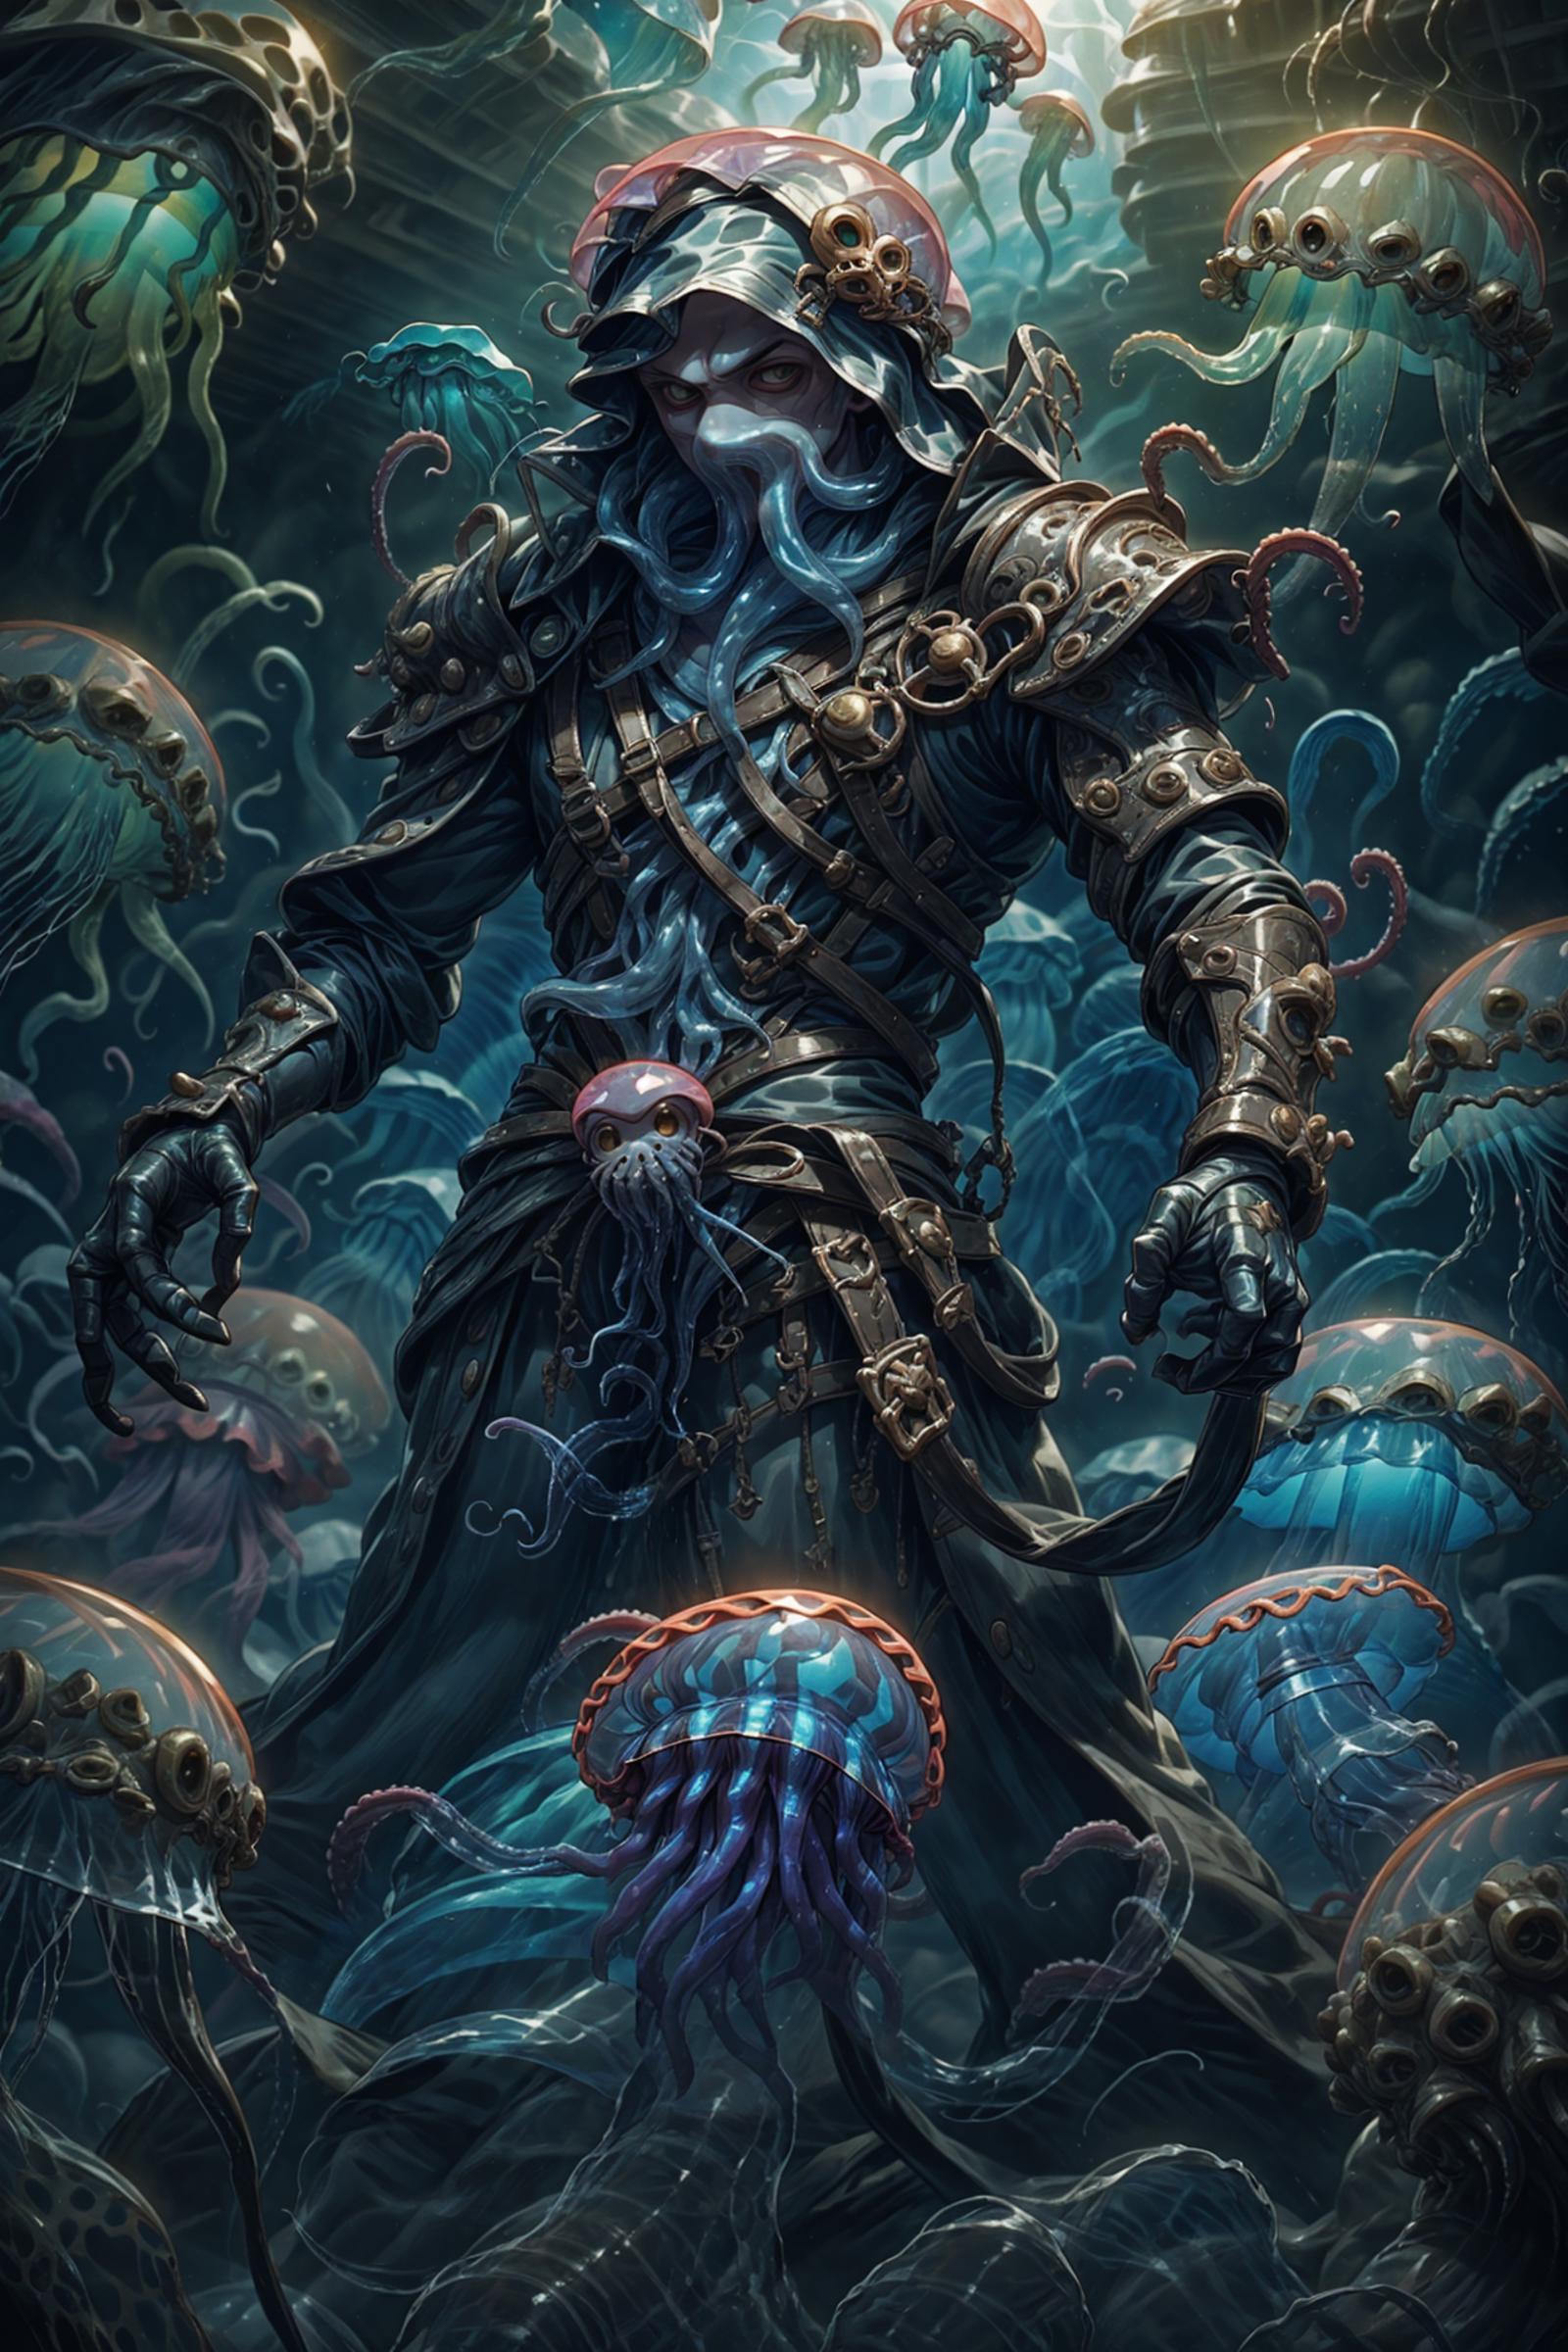 Tentacle Armor image by penguinnes